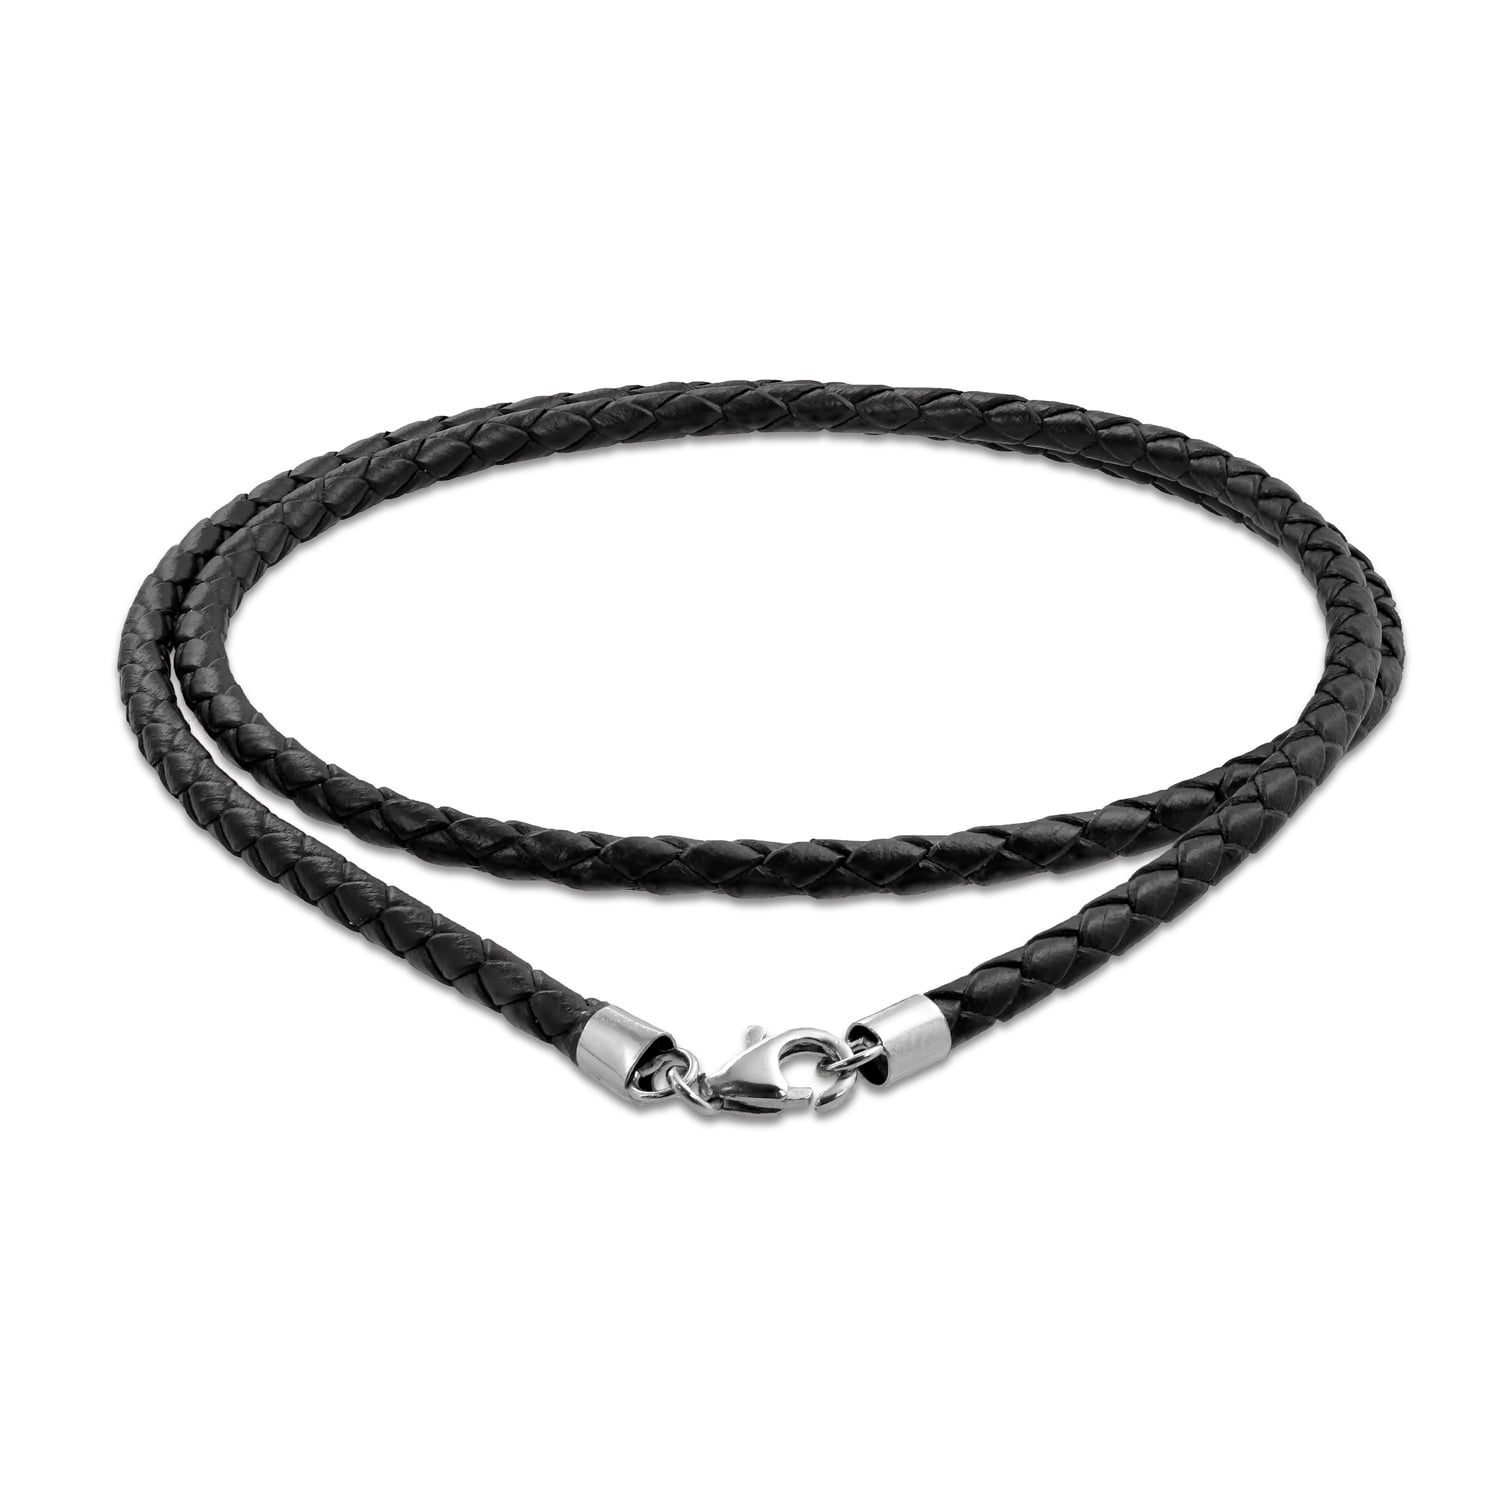 HOLLOW HEART ON  2MM BLACK REAL LEATHER   NECKLACE CORD THONG CHAIN 13-32" 